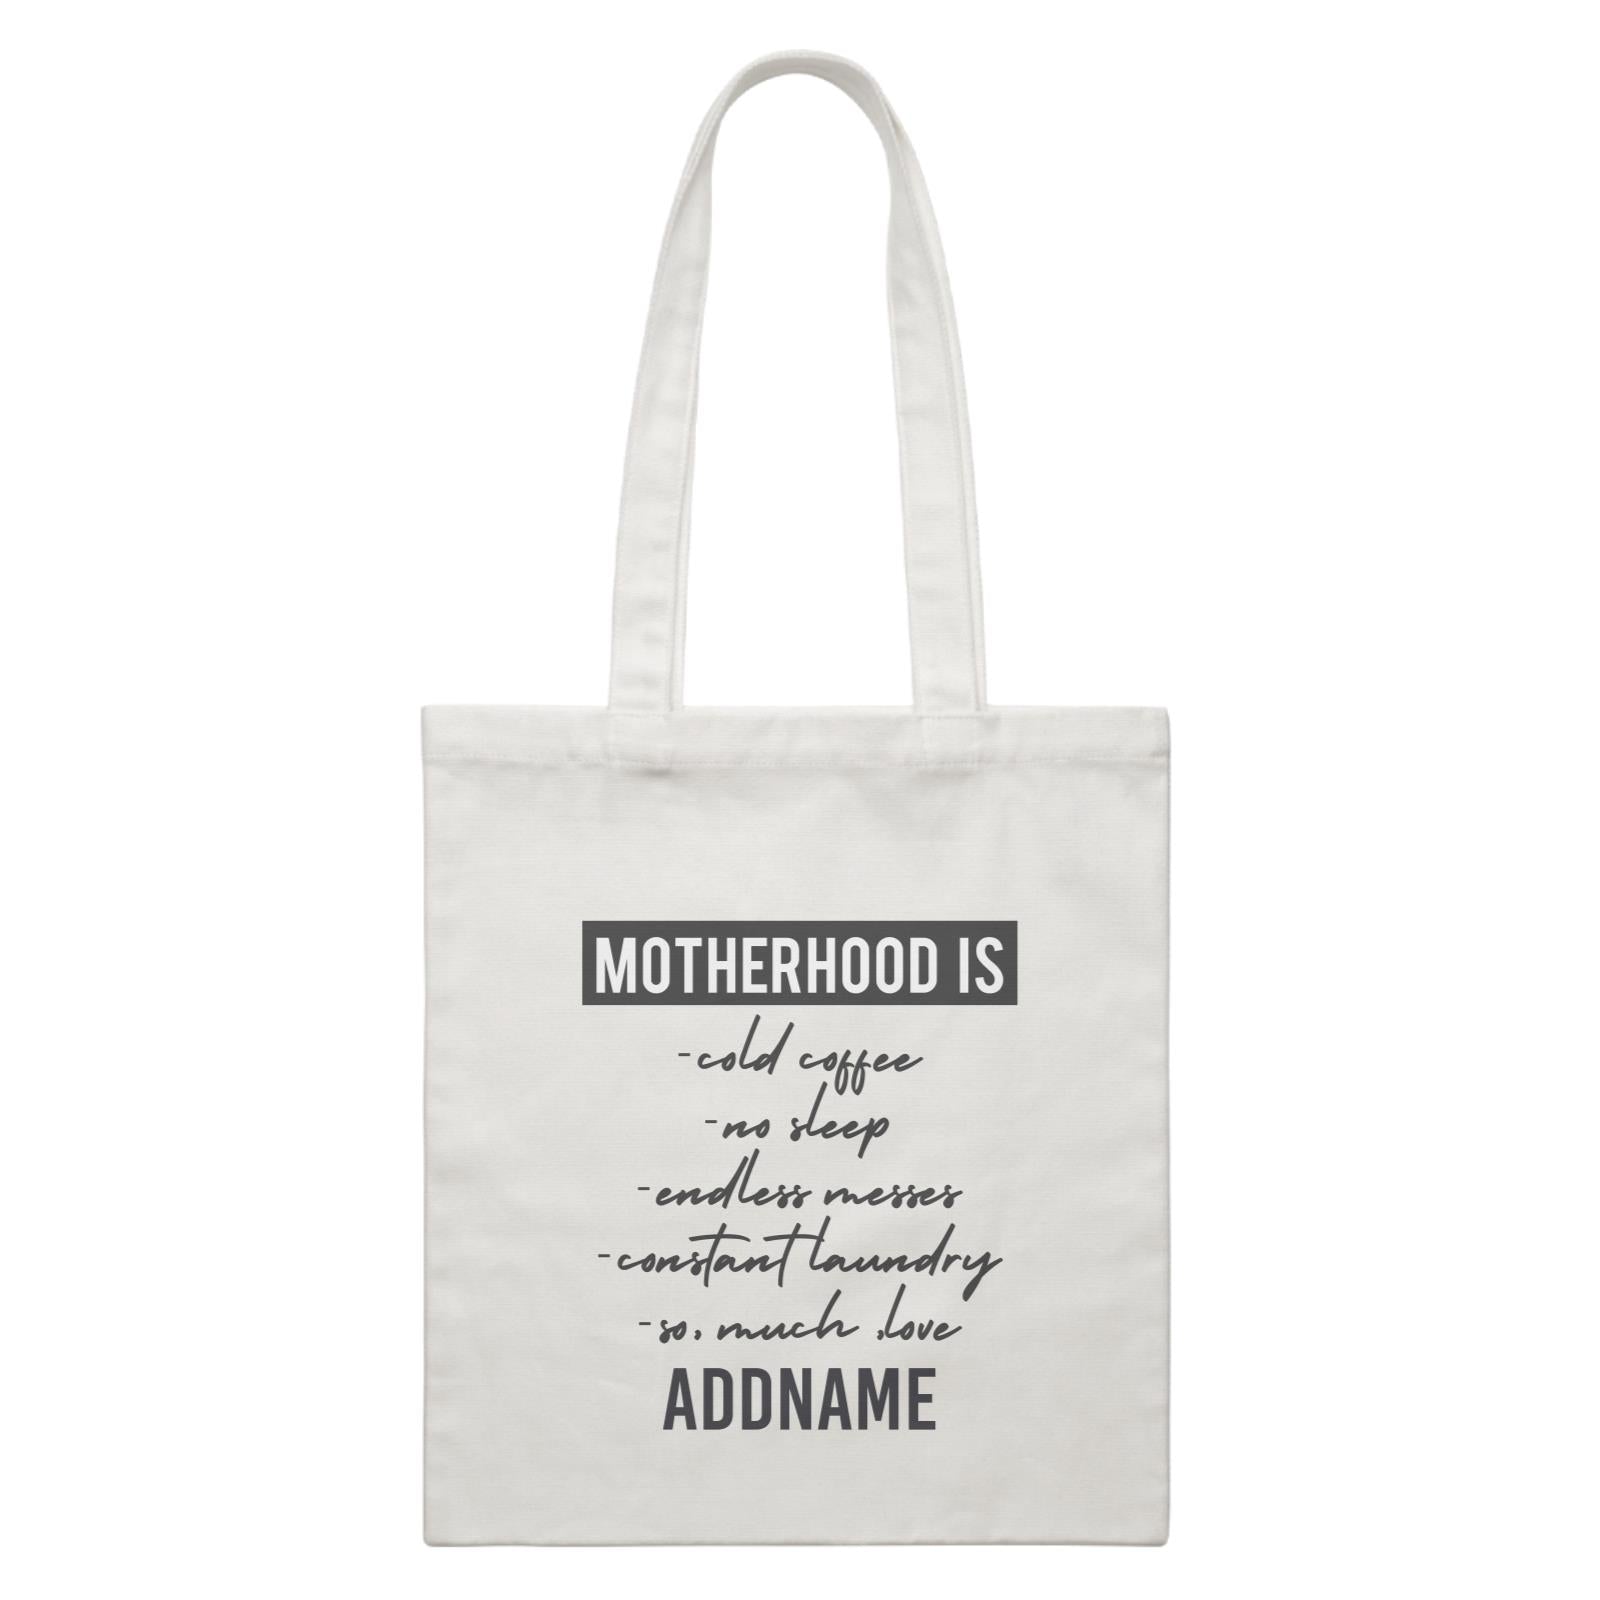 Funny Mom Quotes Motherhood Is So Much Love Addname White Canvas Bag